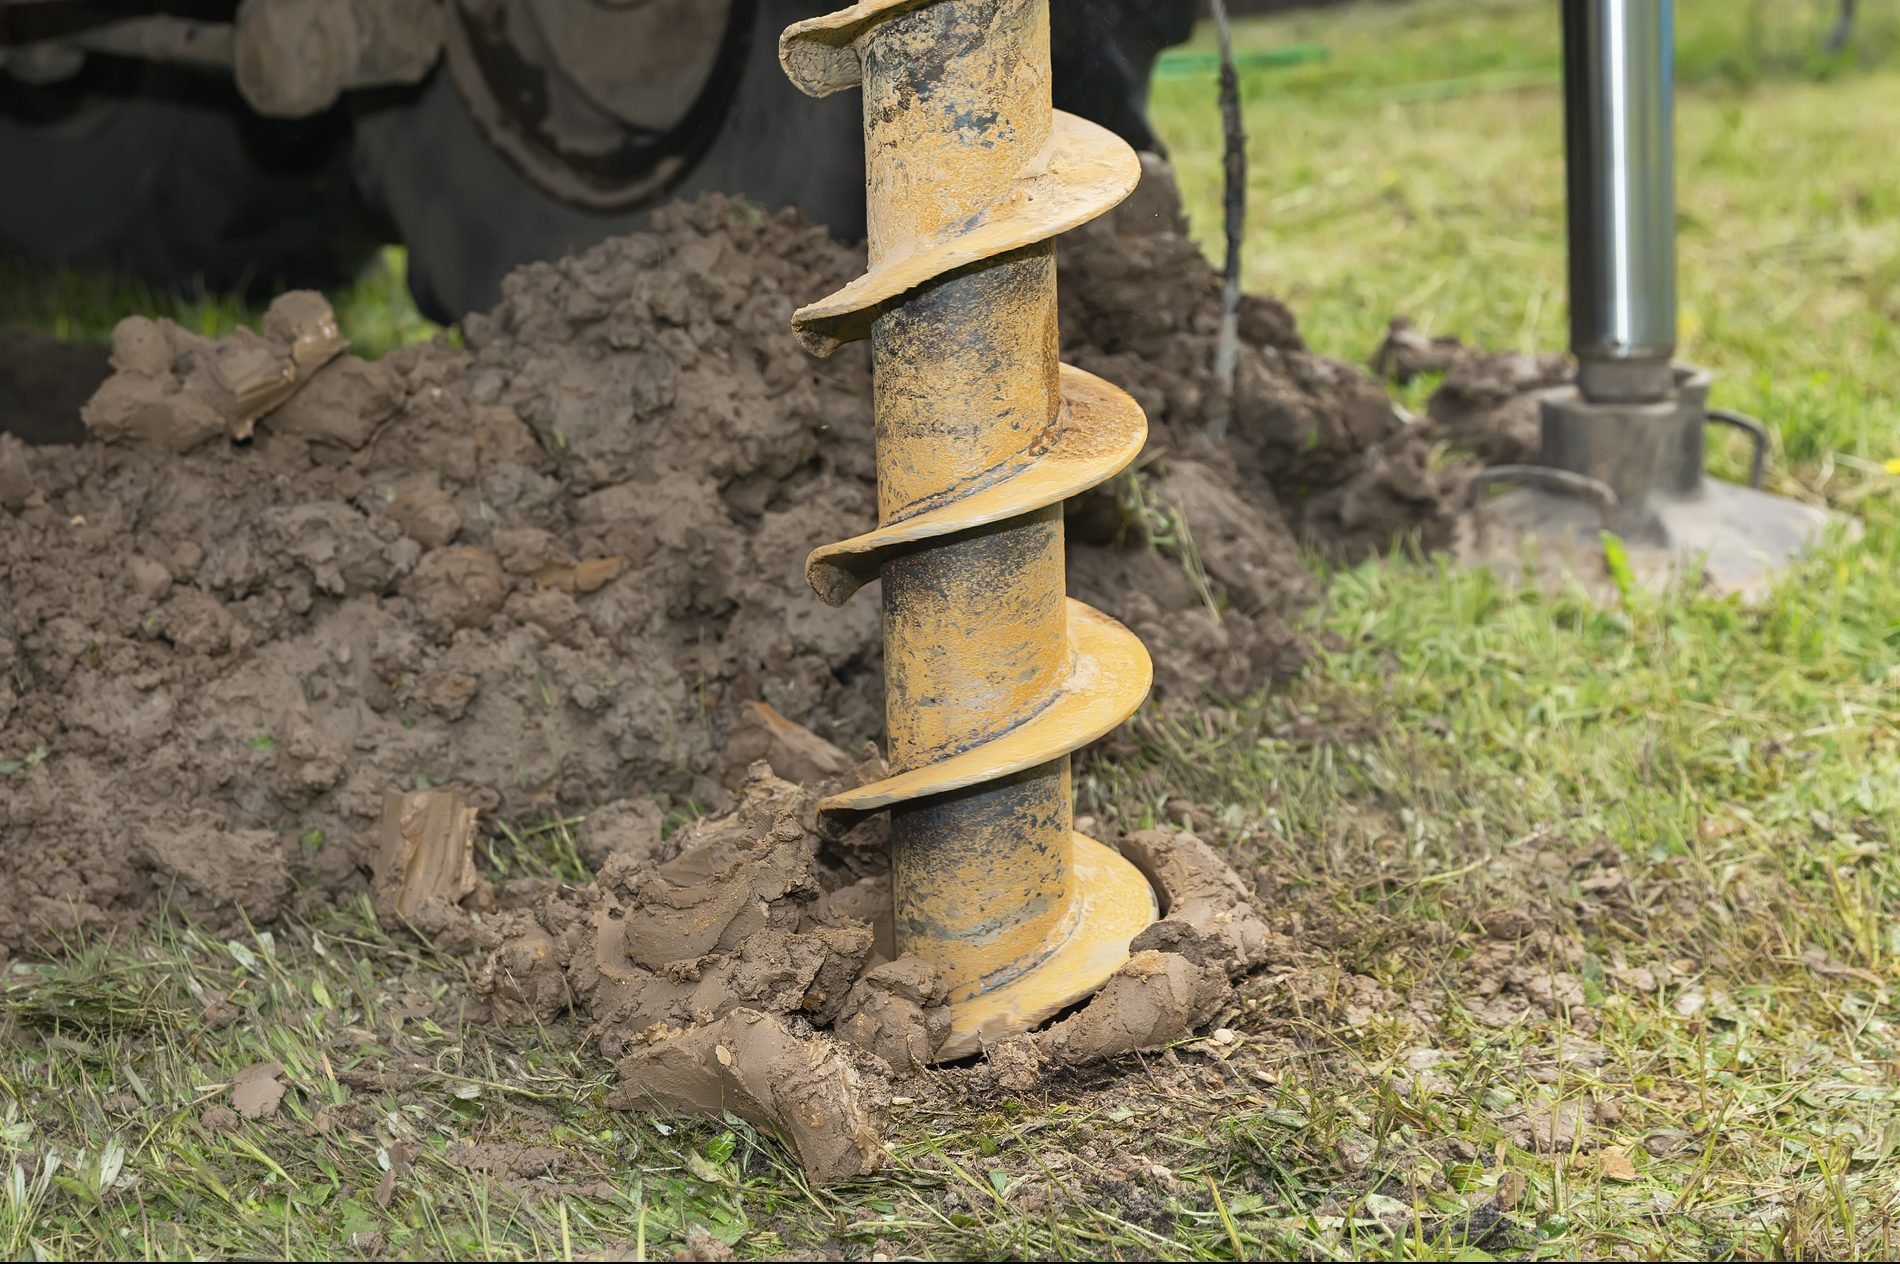 What To Know About Digging a Well